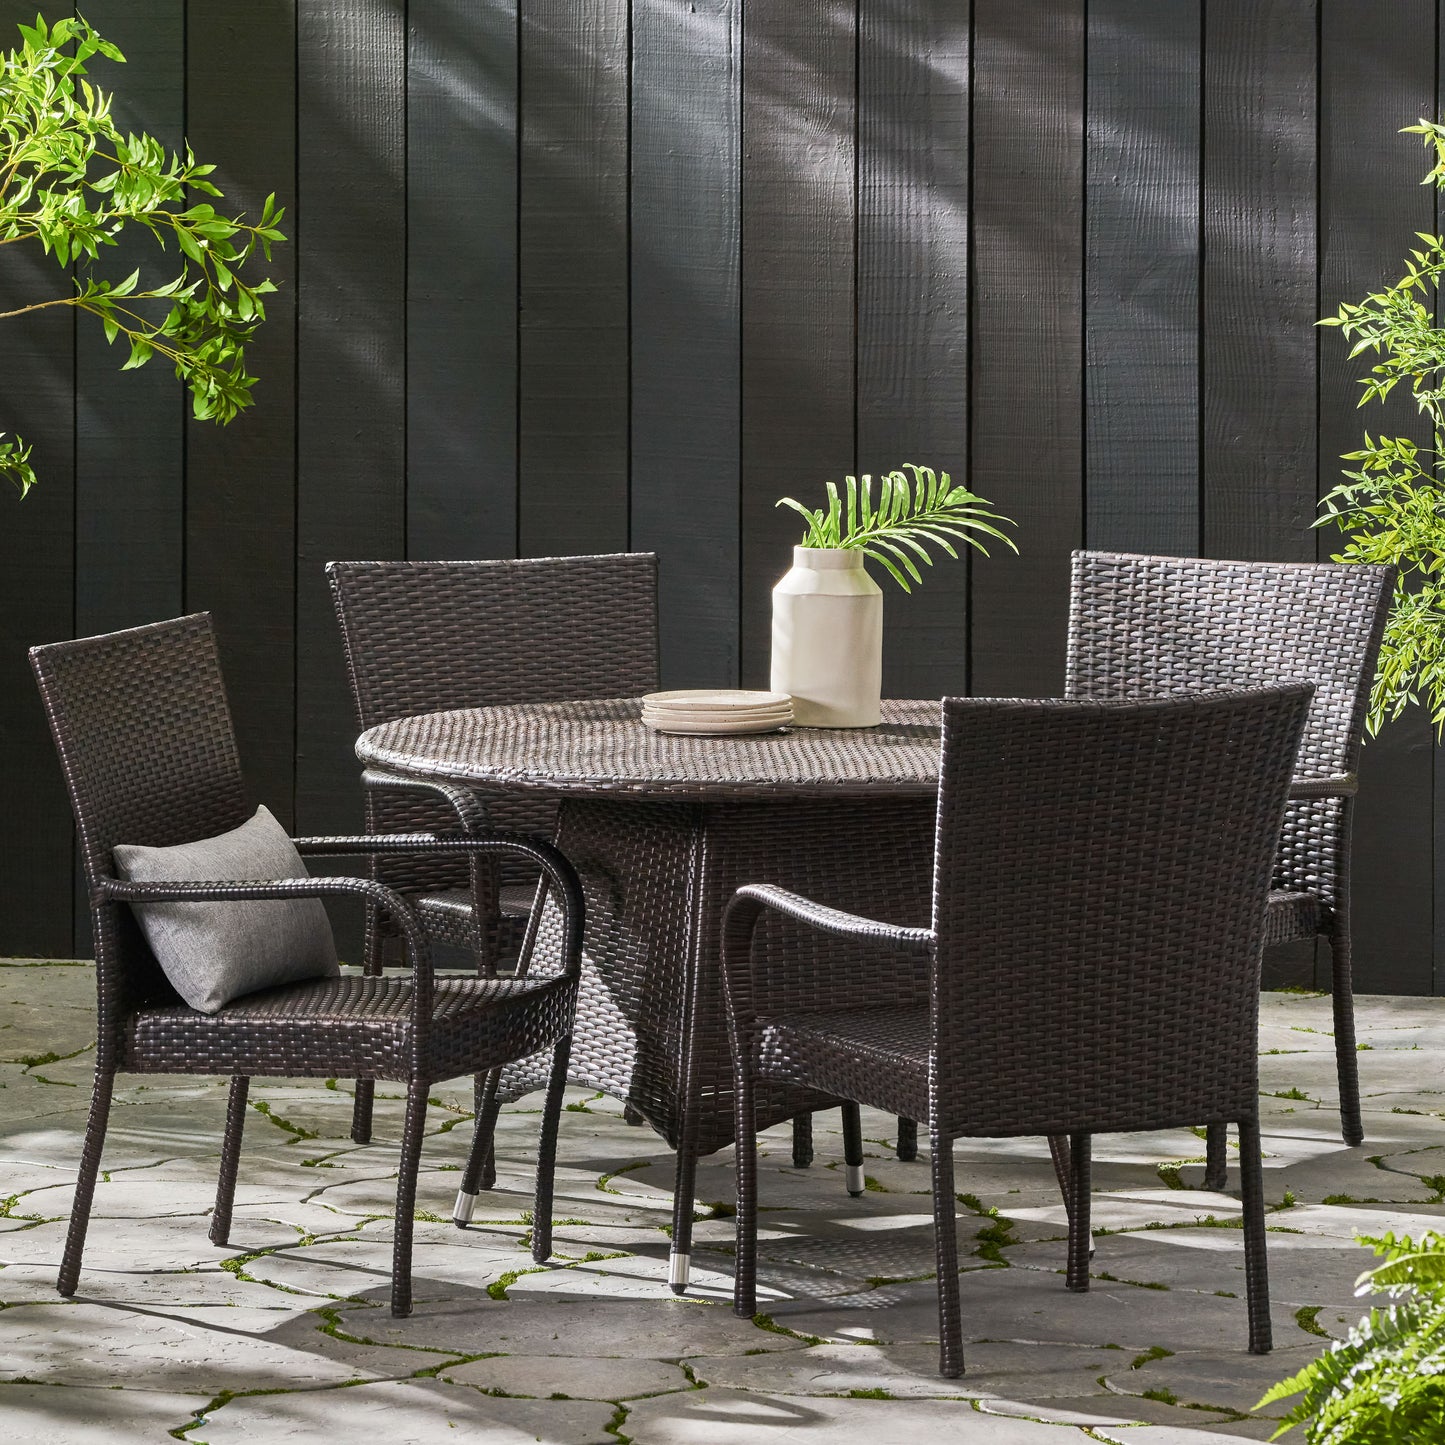 Kory Outdoor 5pc Multibrown Wicker Dining Set